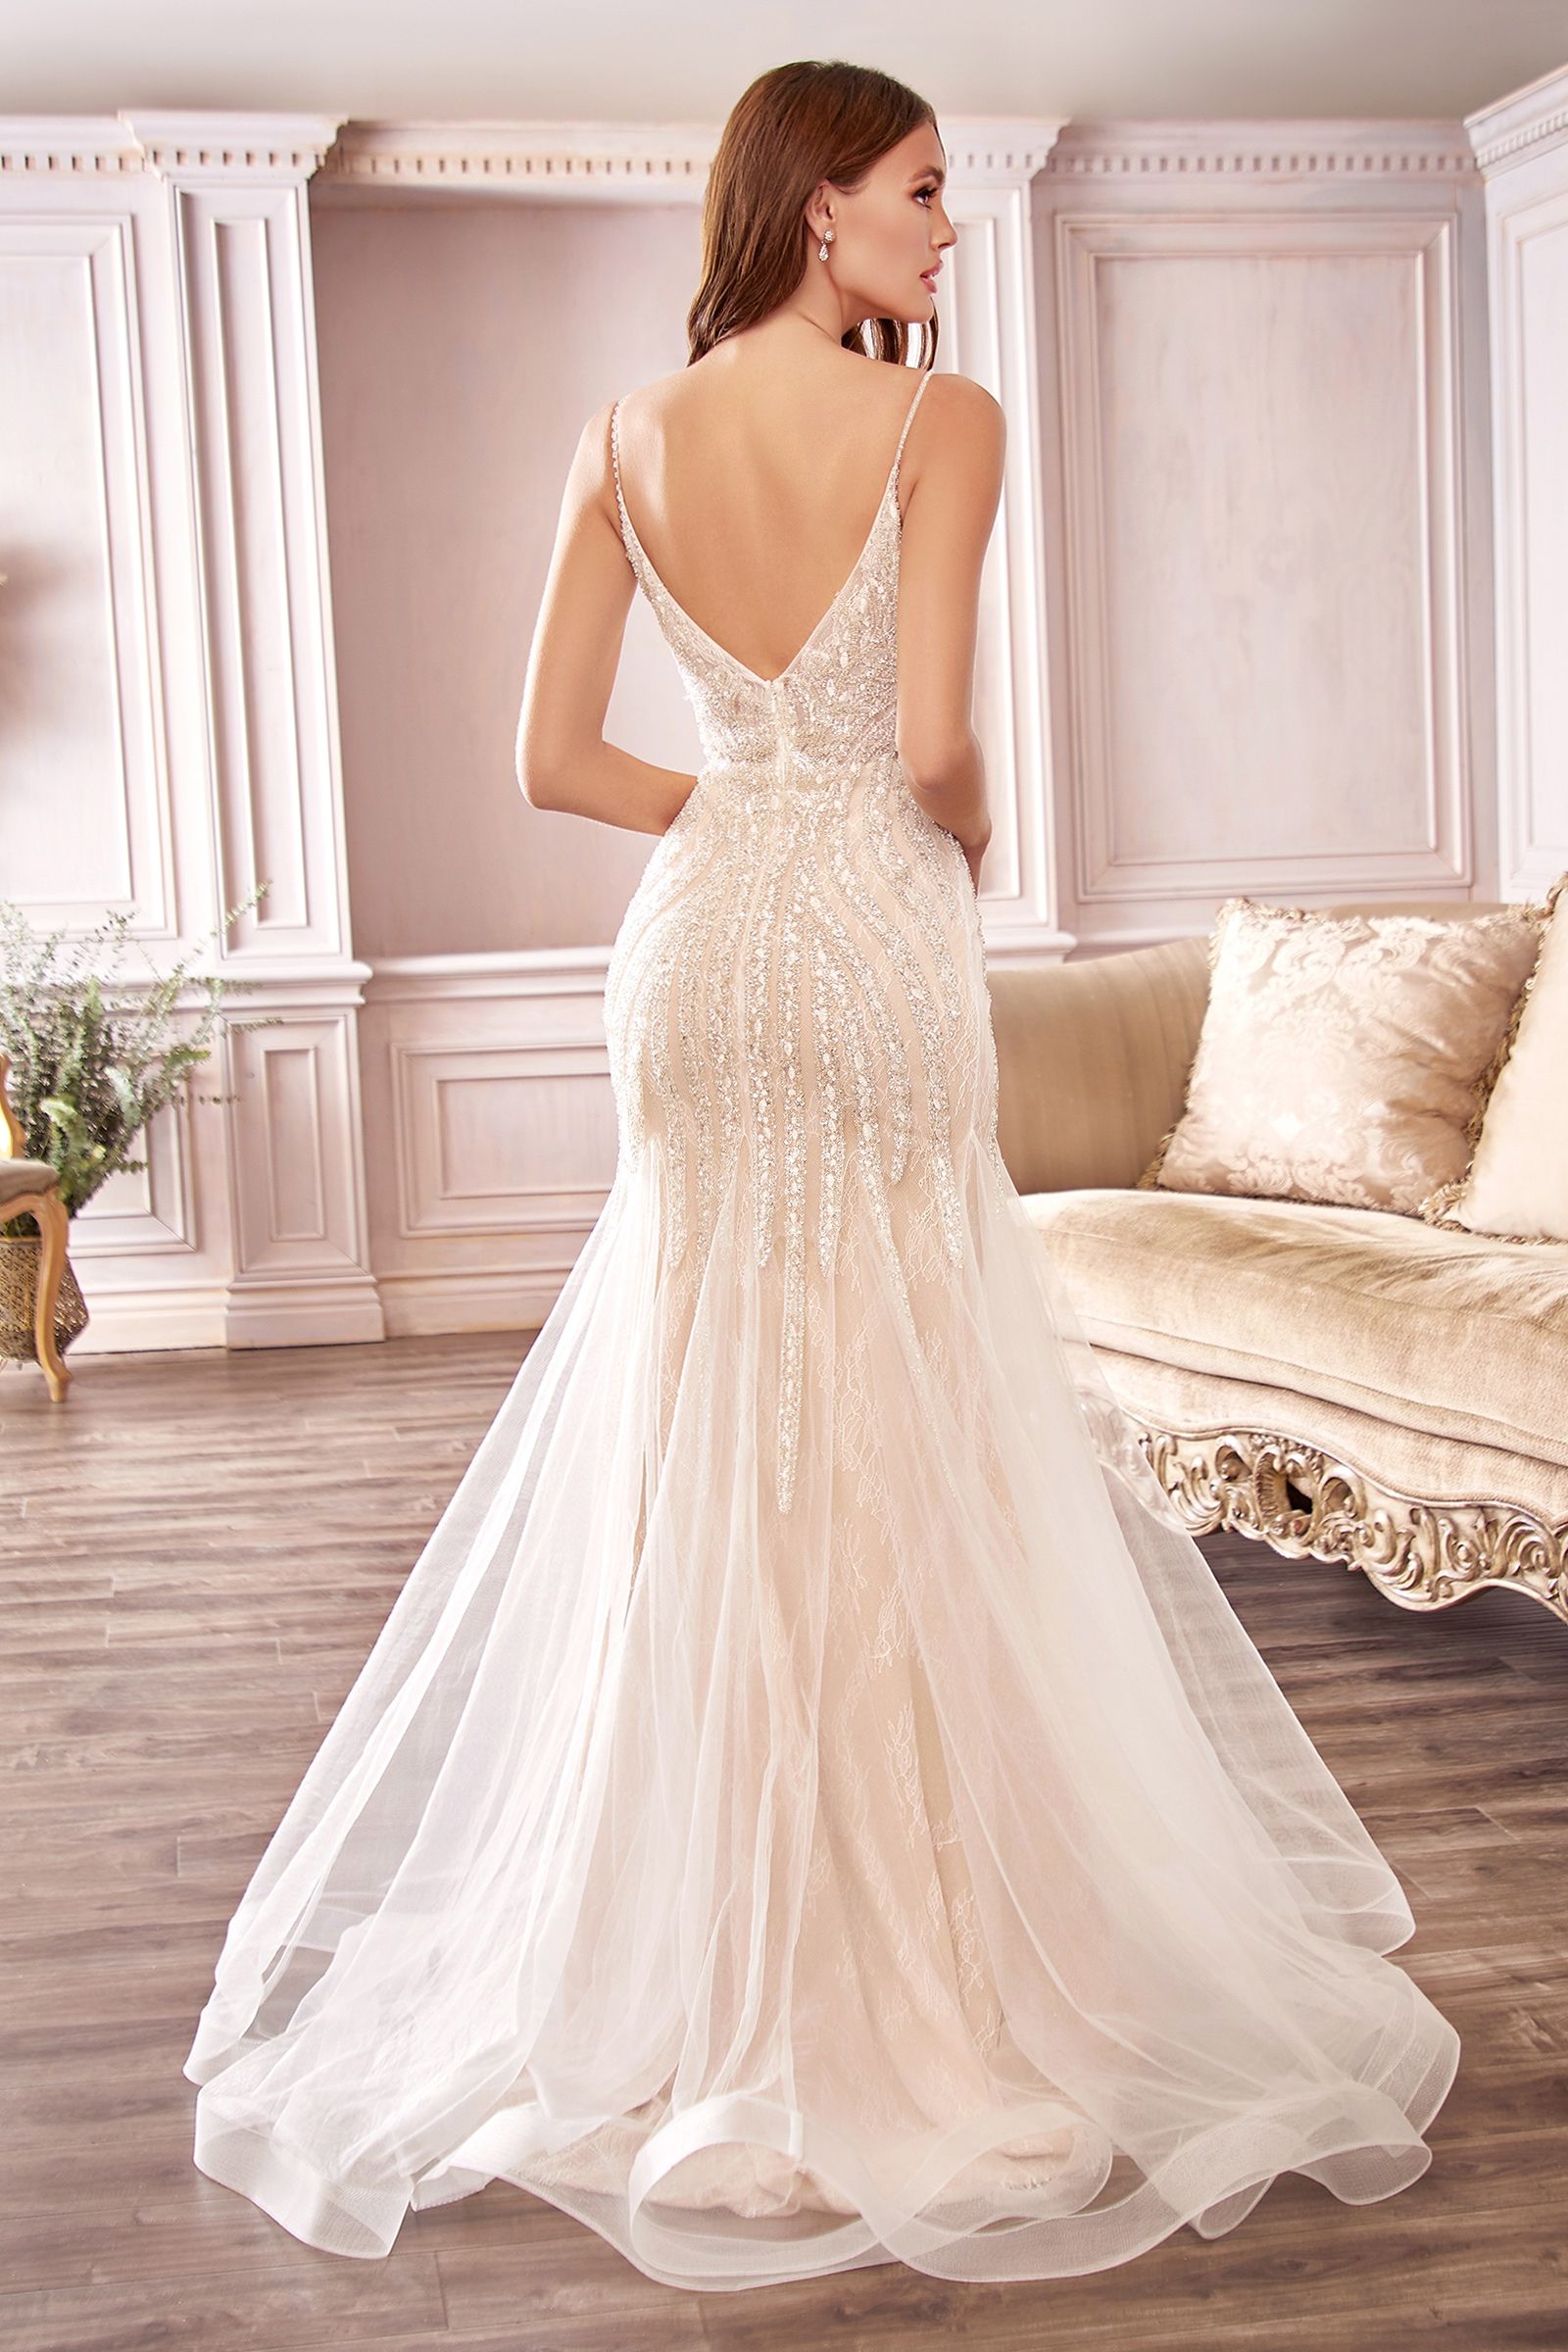 Bead and Sequin Embellished Mesh Overlay Gown | David's Bridal